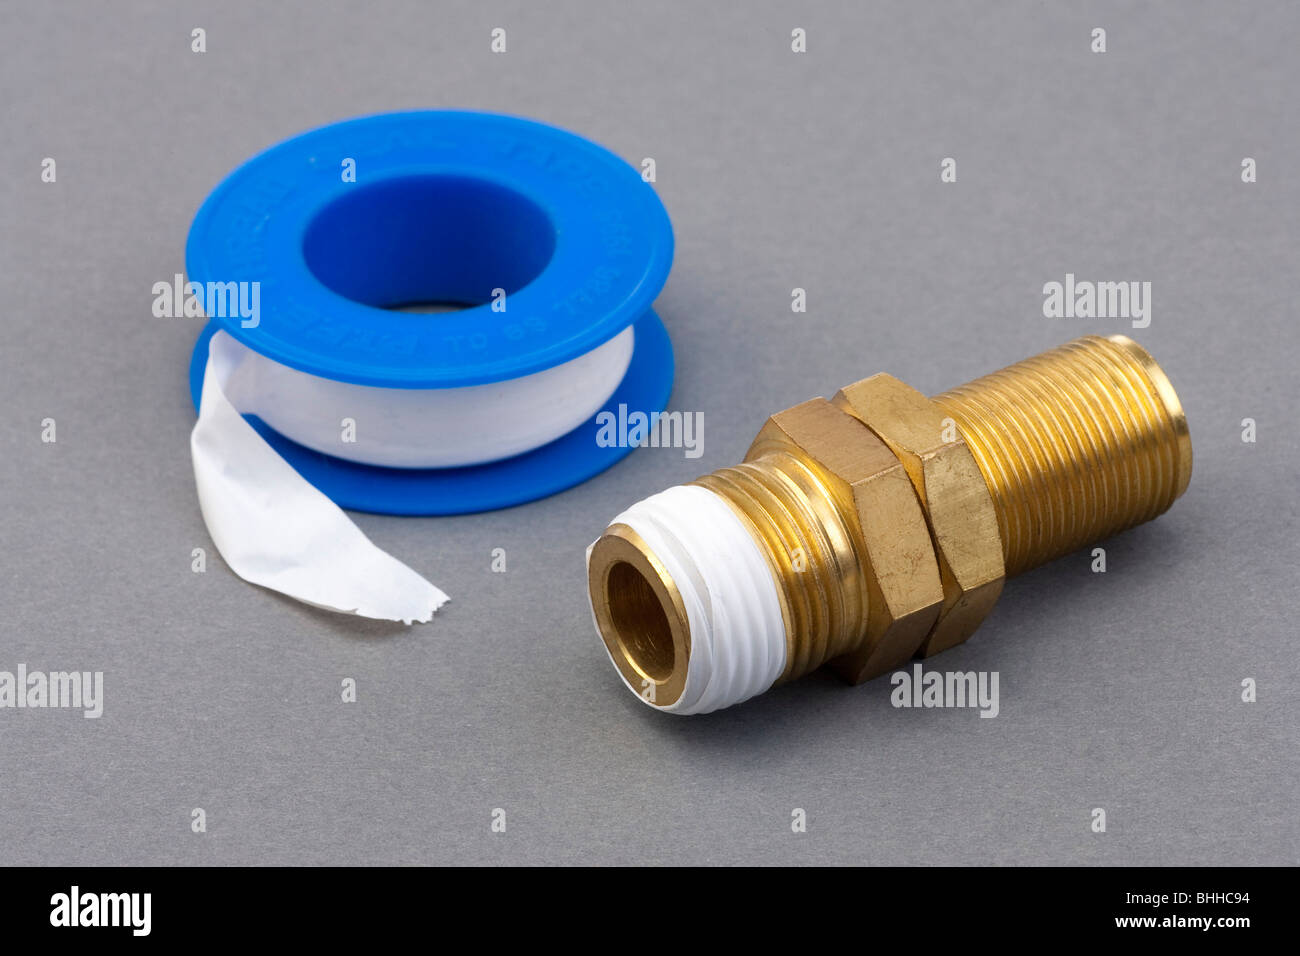 PTFE teflon tape used to seal threaded pipe connectors Stock Photo